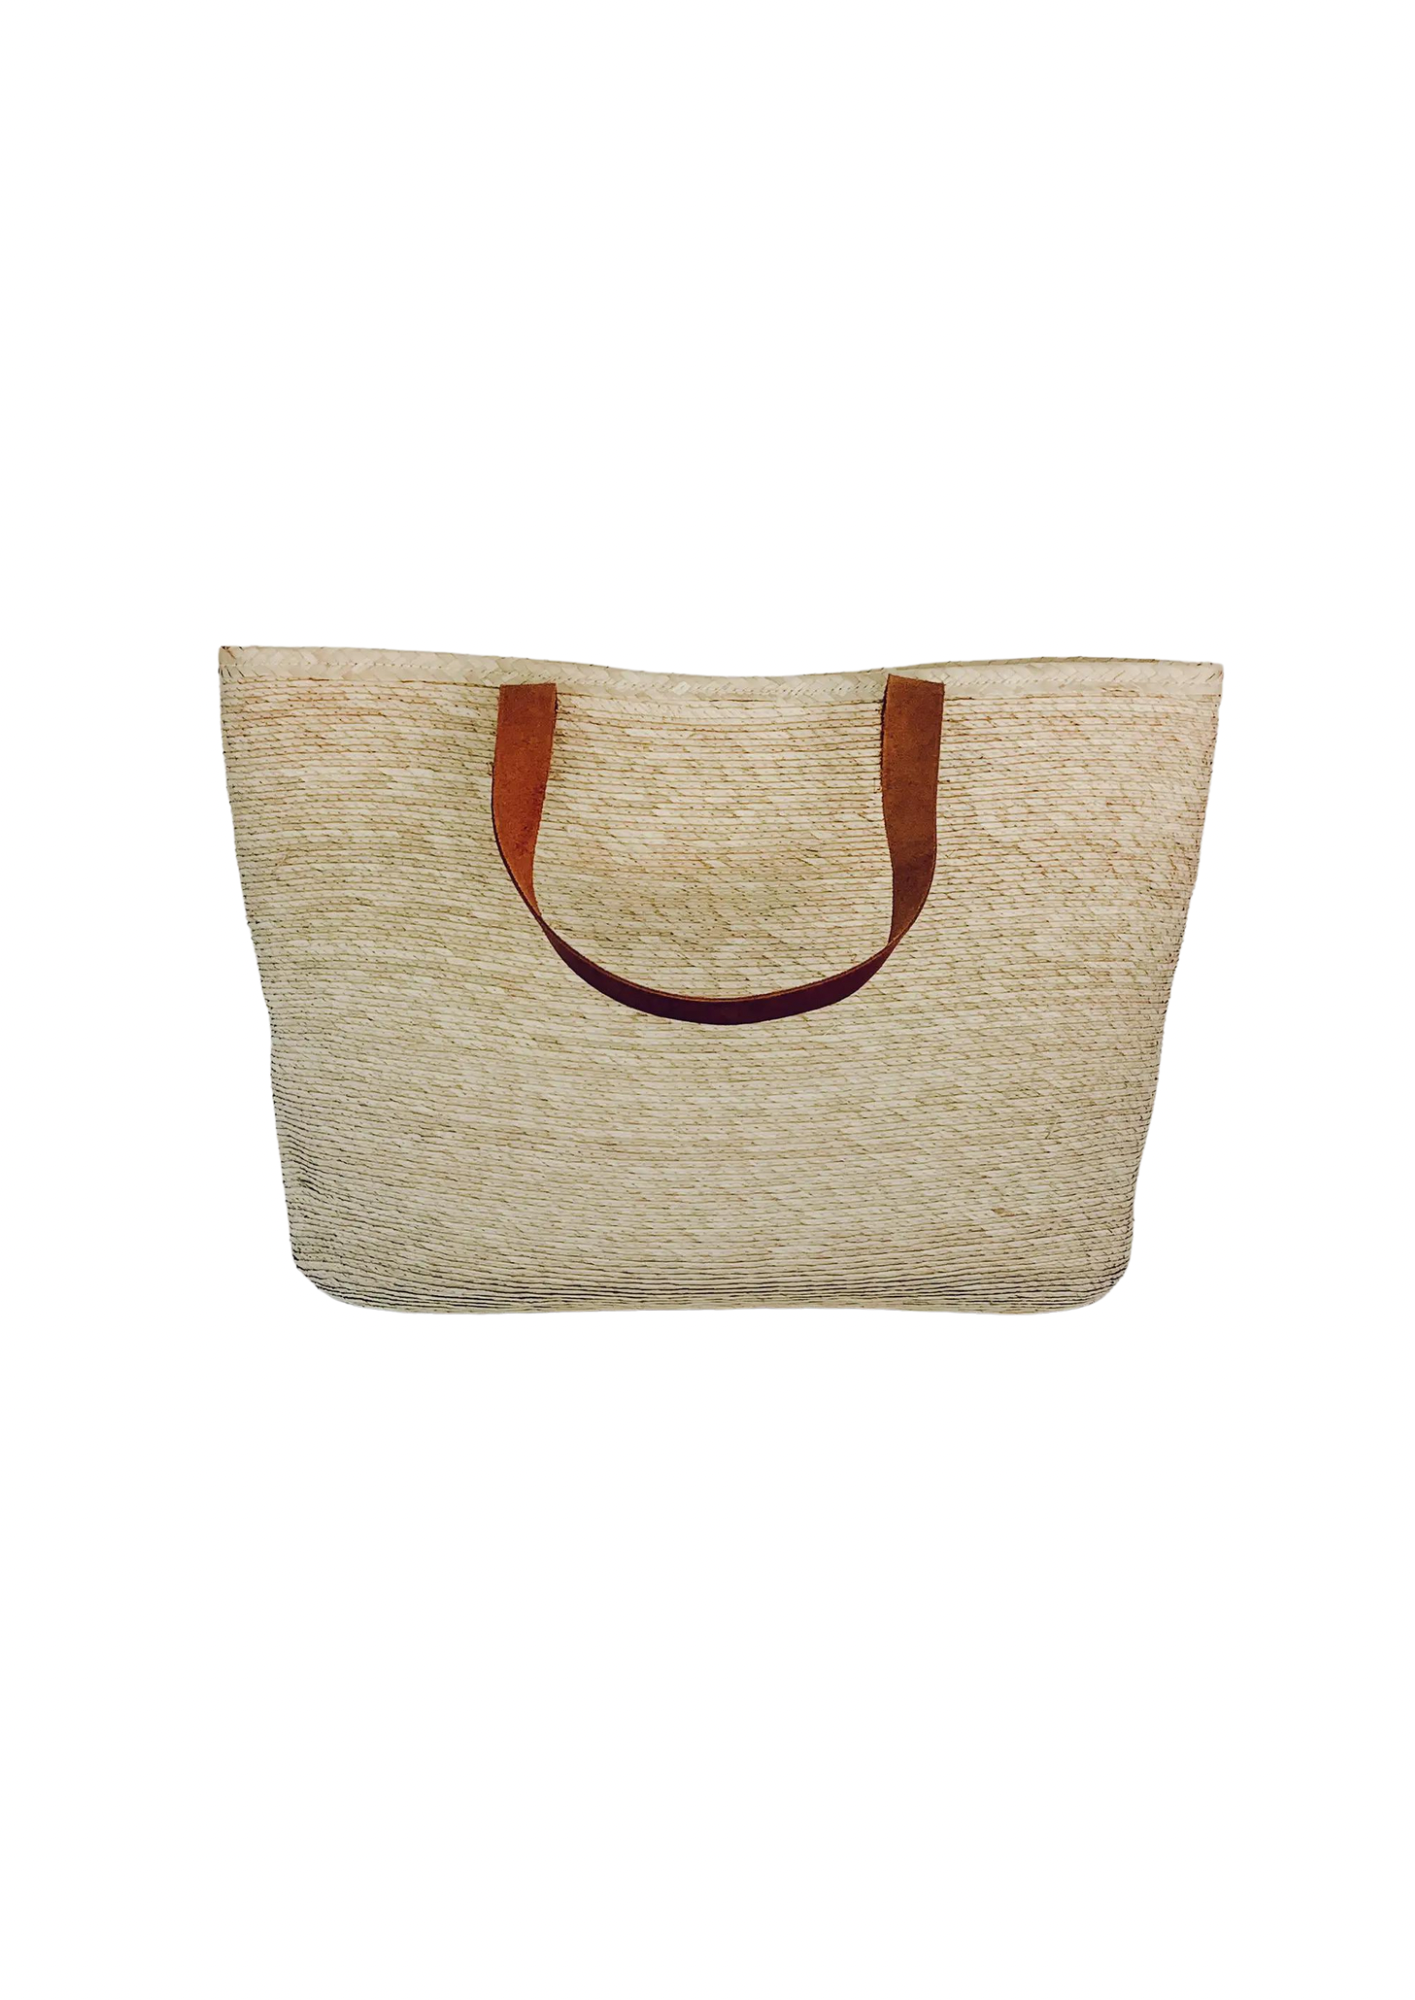 Harlow Straw Market Tote With Leather Handles